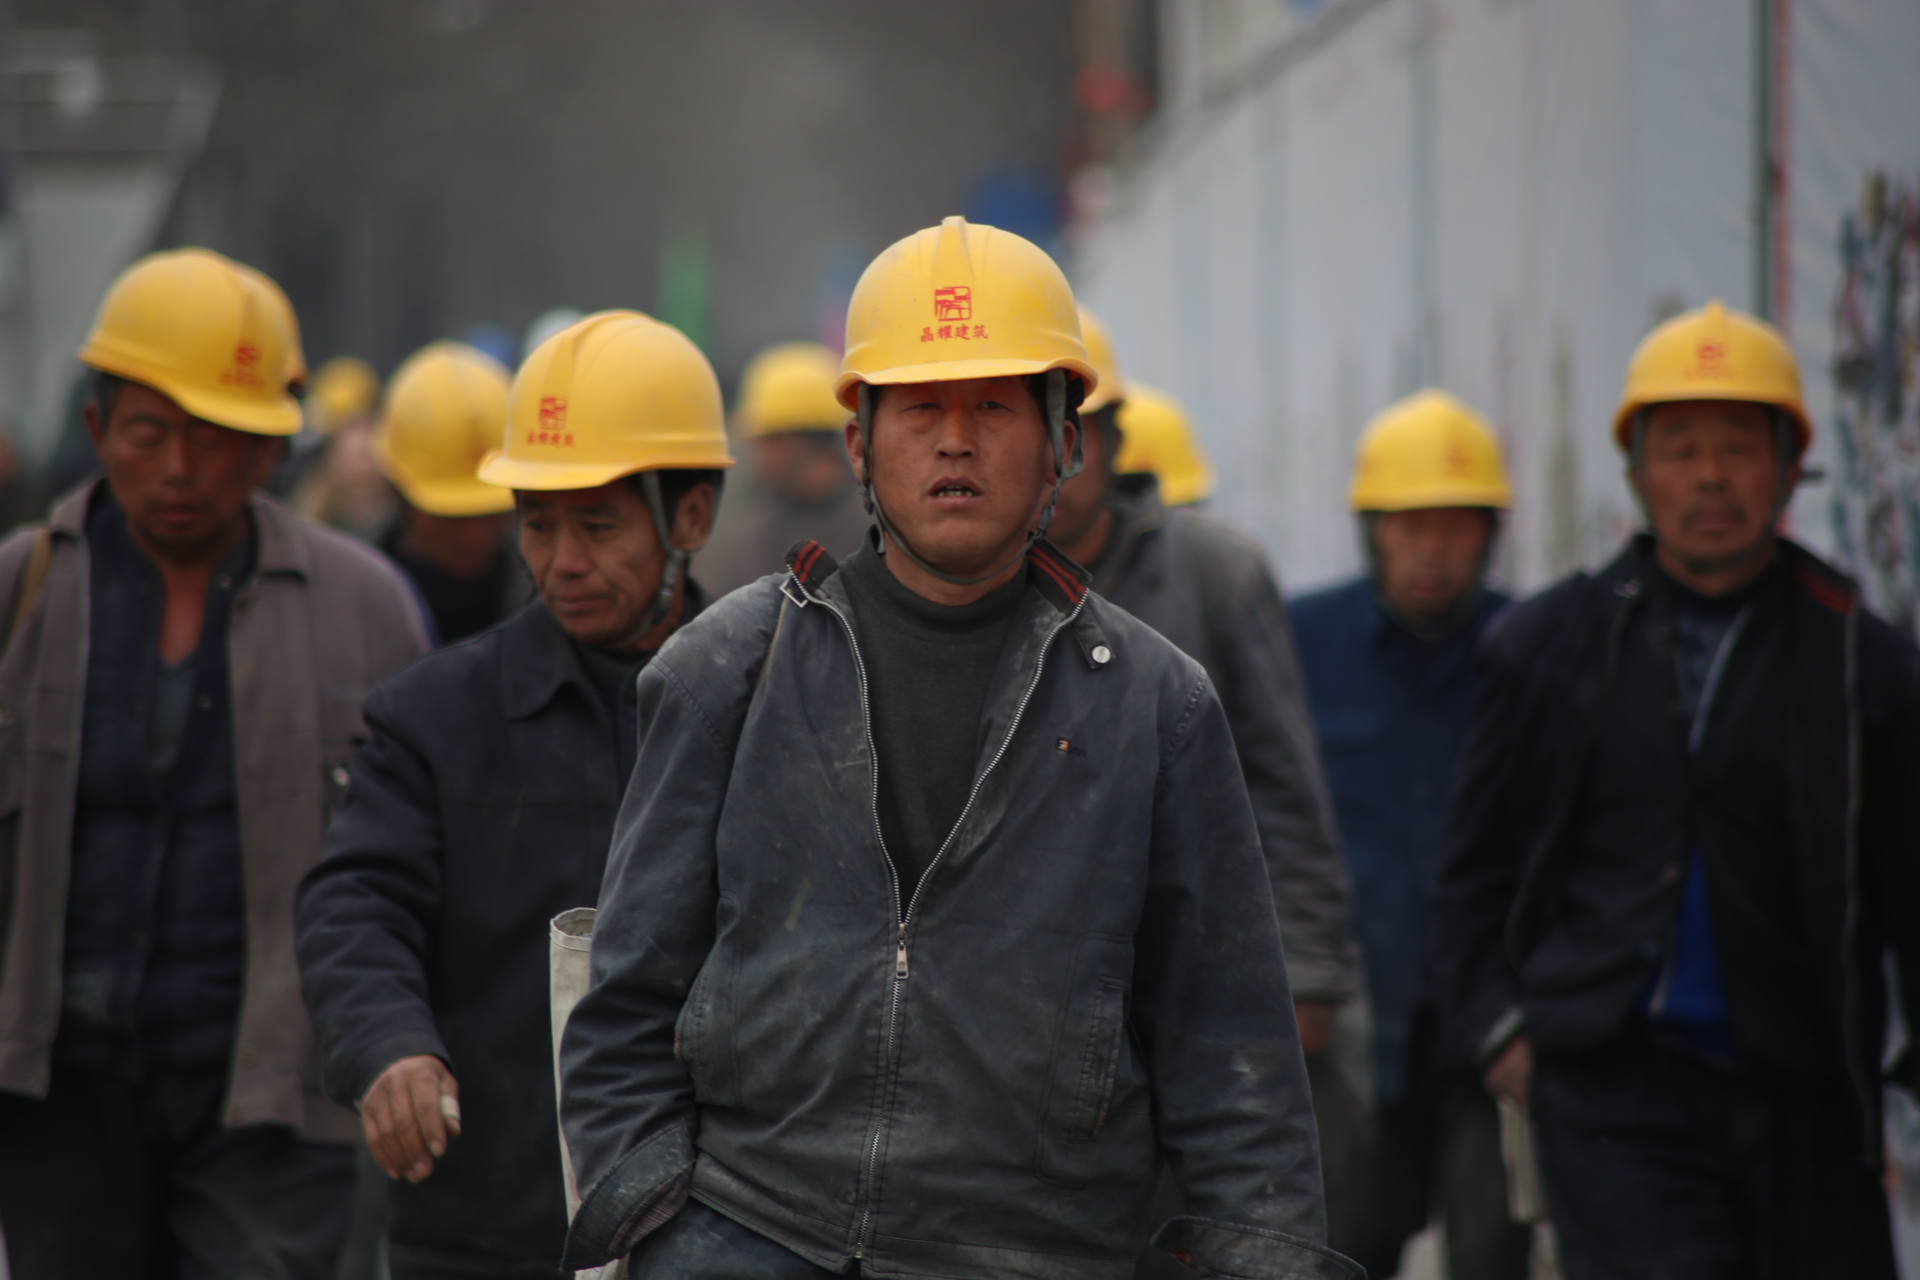 2432 group of persons wearing yellow safety helmet during daytime 33266